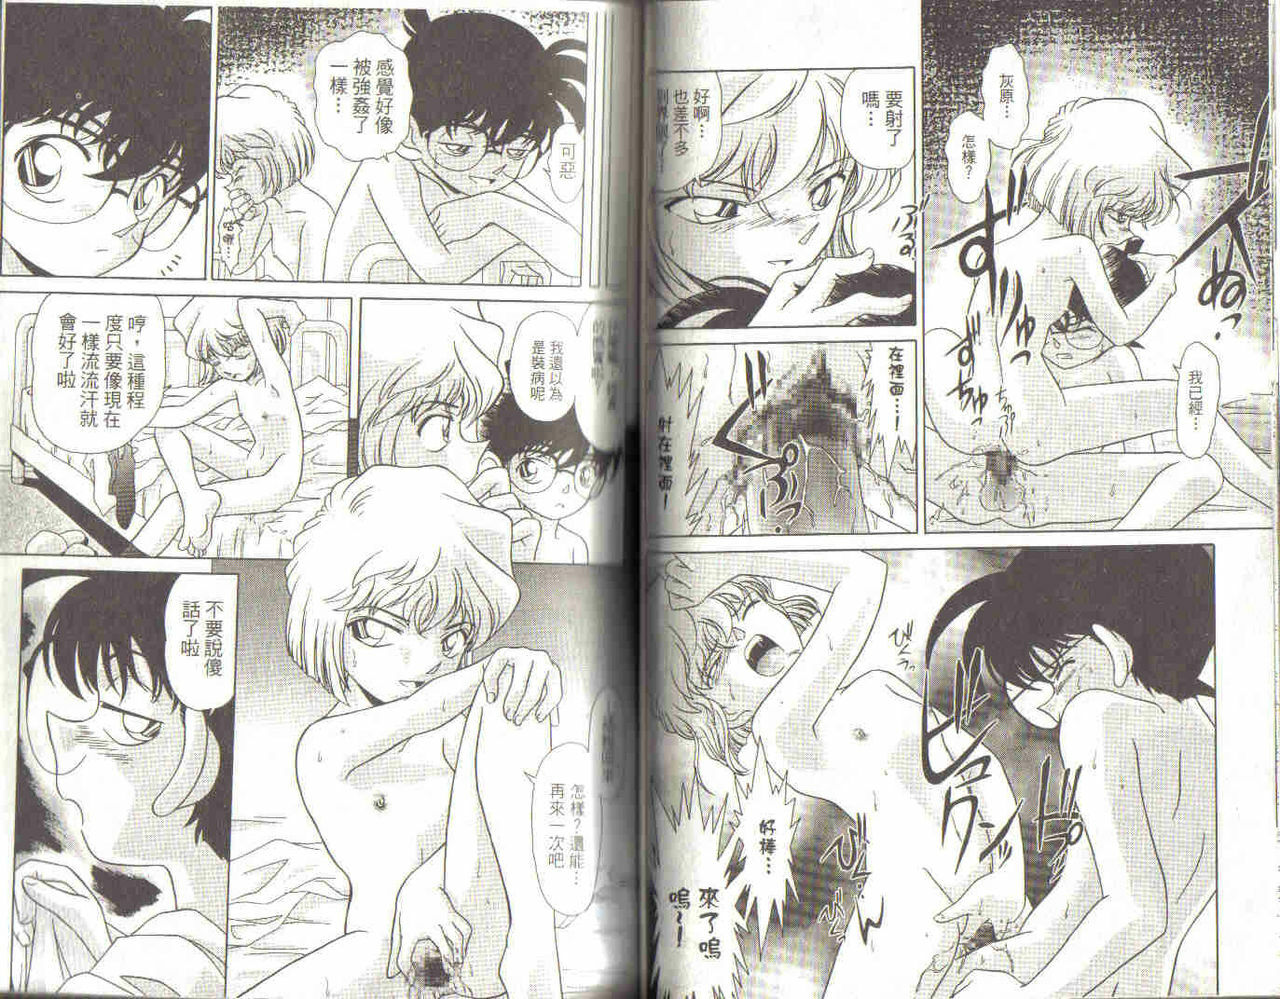 [Ooya Nako] Detective Assistant Vol. 3 (Detective Conan) [Chinese] page 45 full